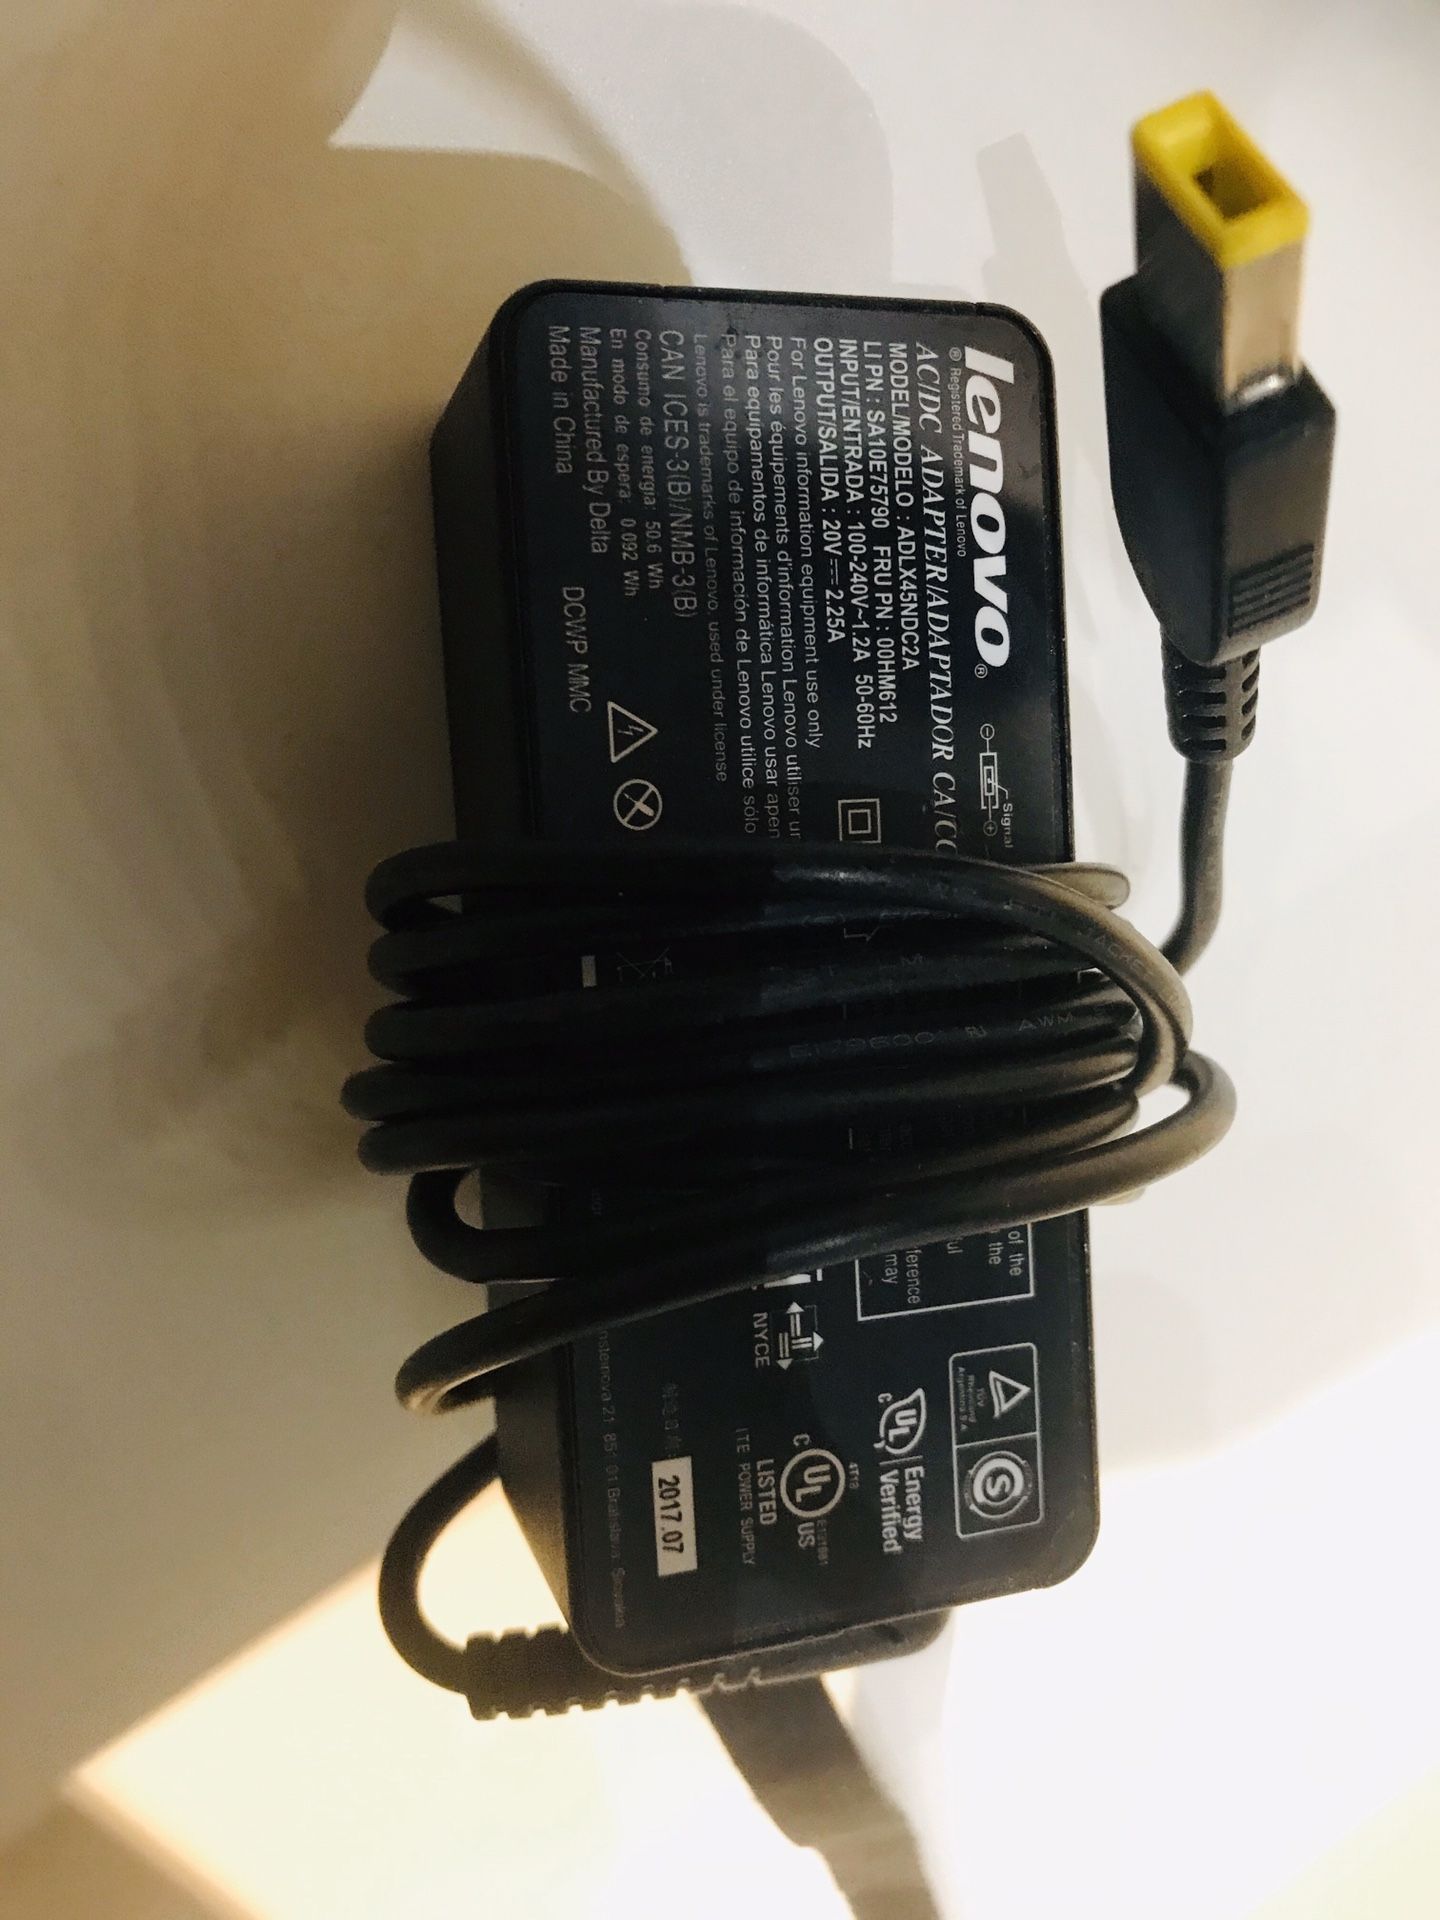 Lenovo. NEW. GENUINE. Charger READ AD